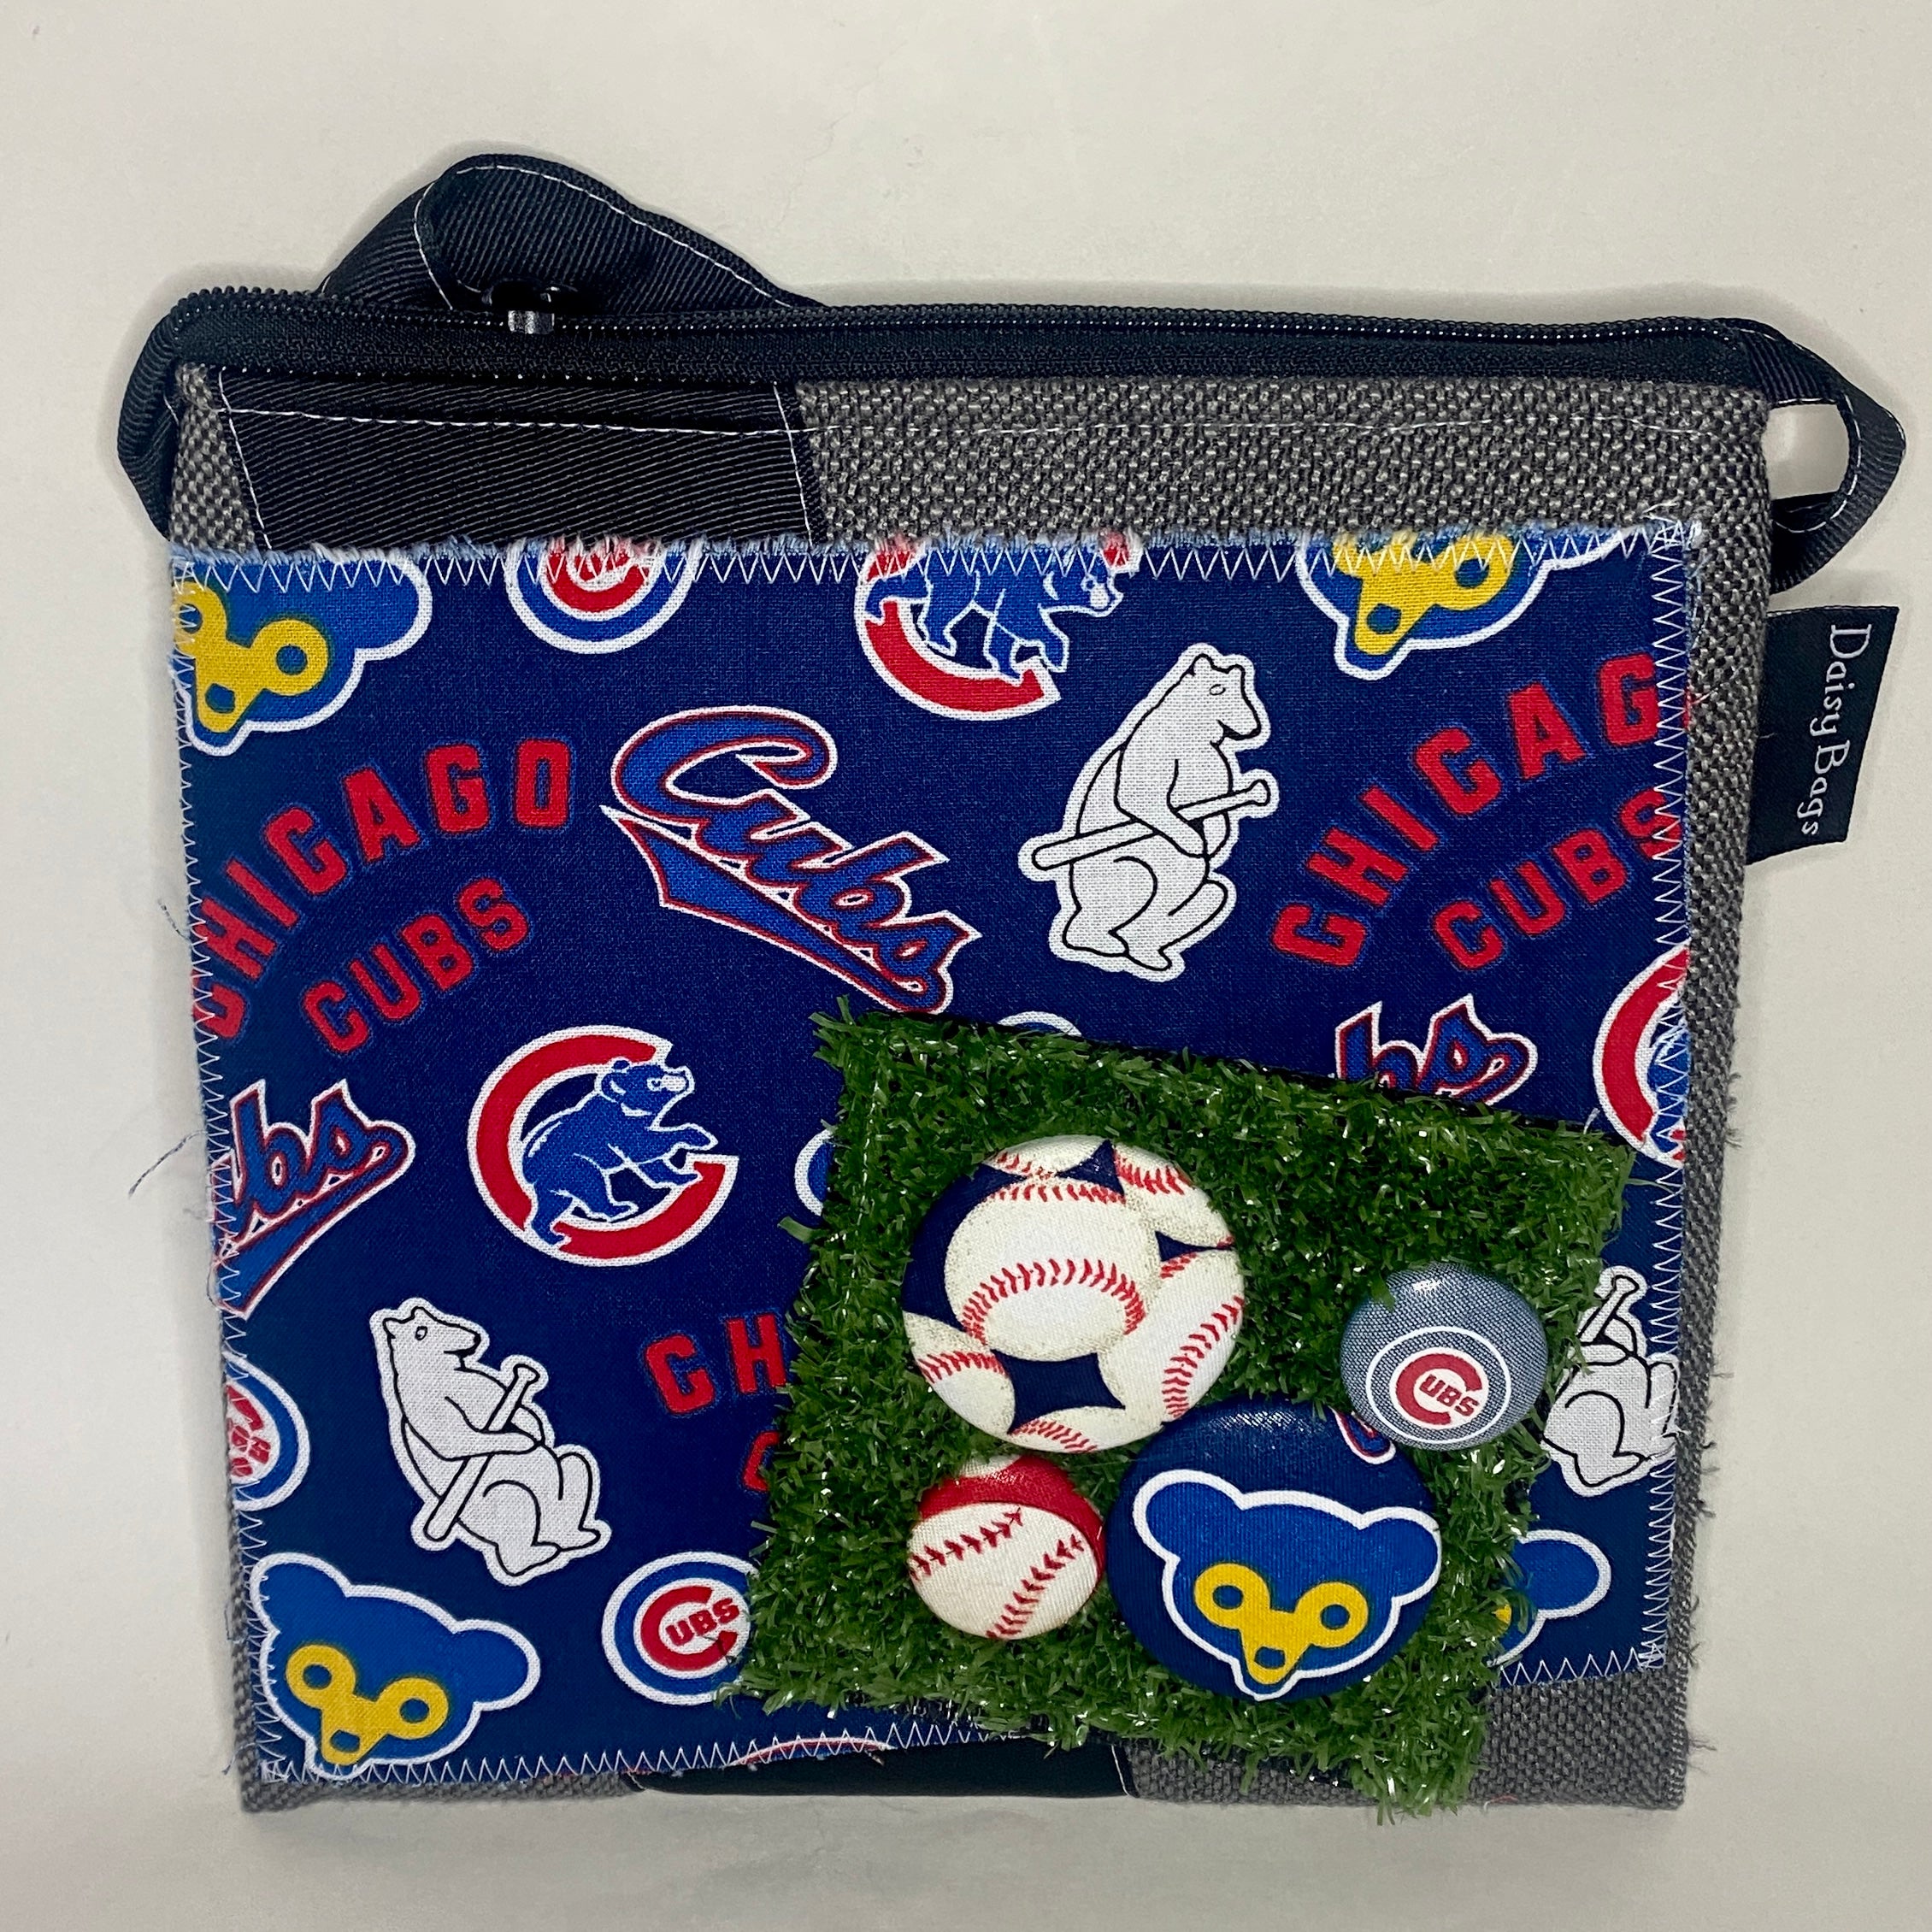 Chicago Cubs Wrigley Field Tote Bag by Christopher Arndt - Pixels Merch